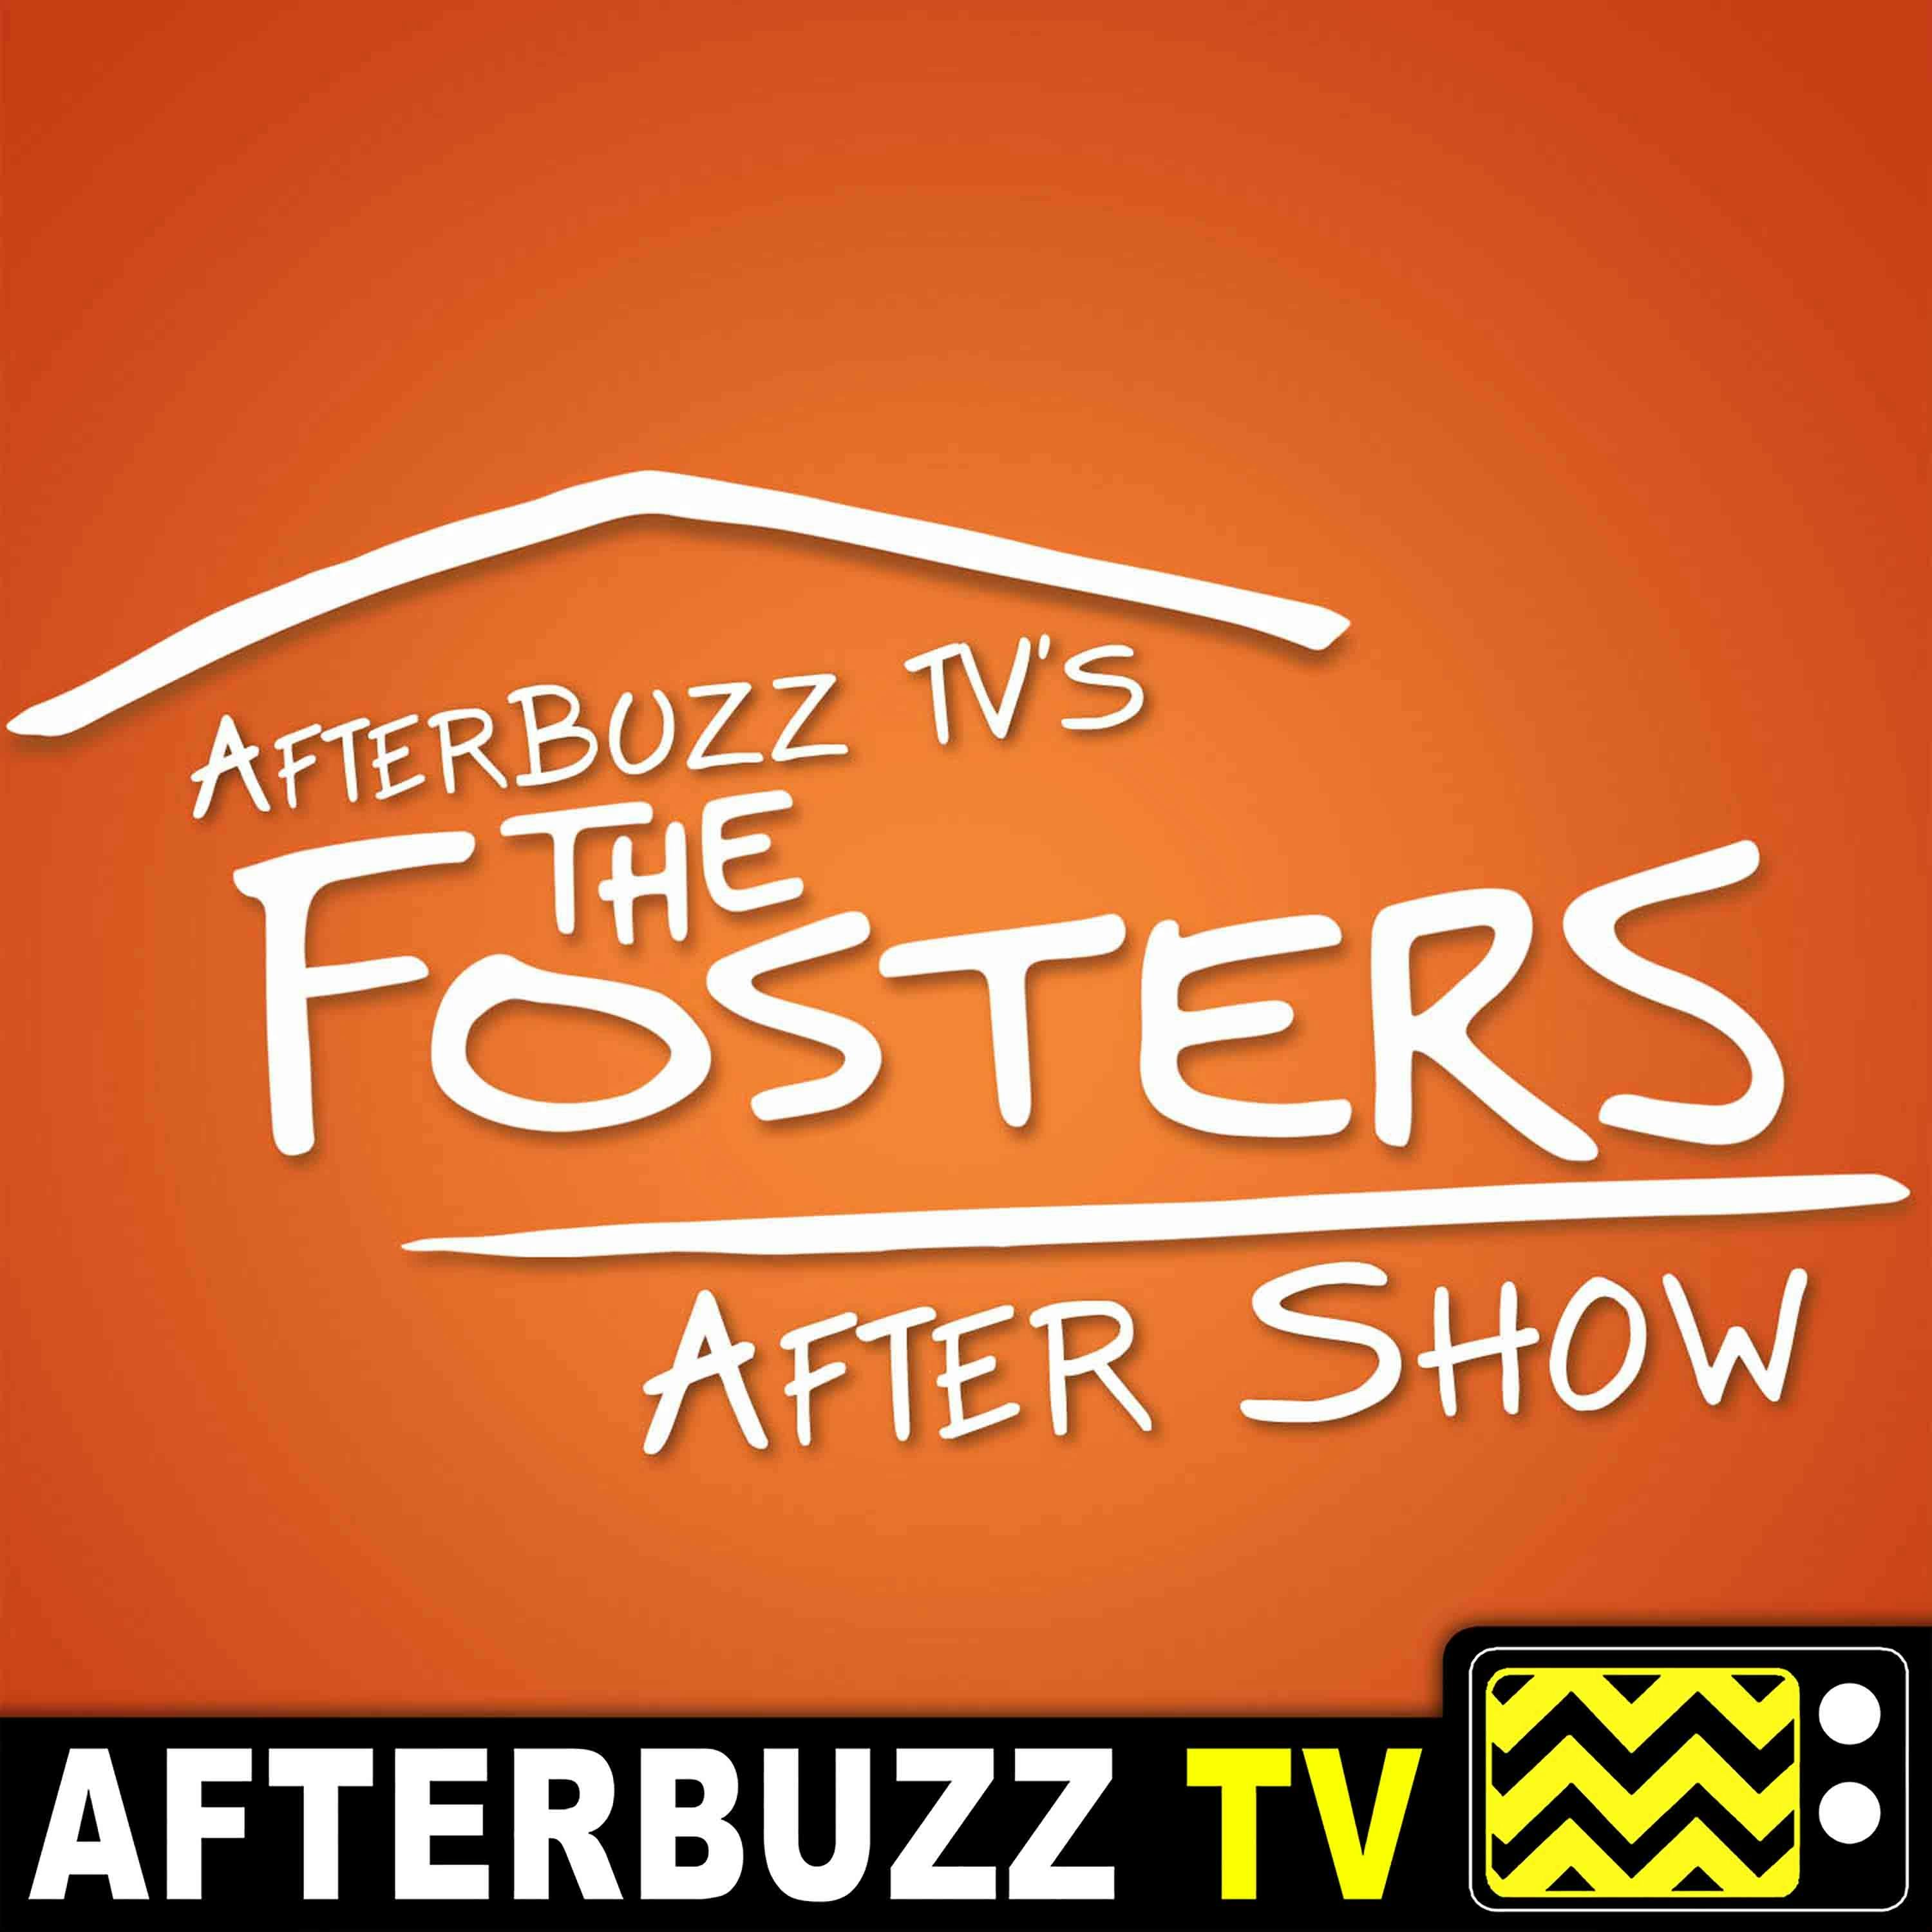 The Fosters S:2 | Take Me Out E:2 | AfterBuzz TV AfterShow